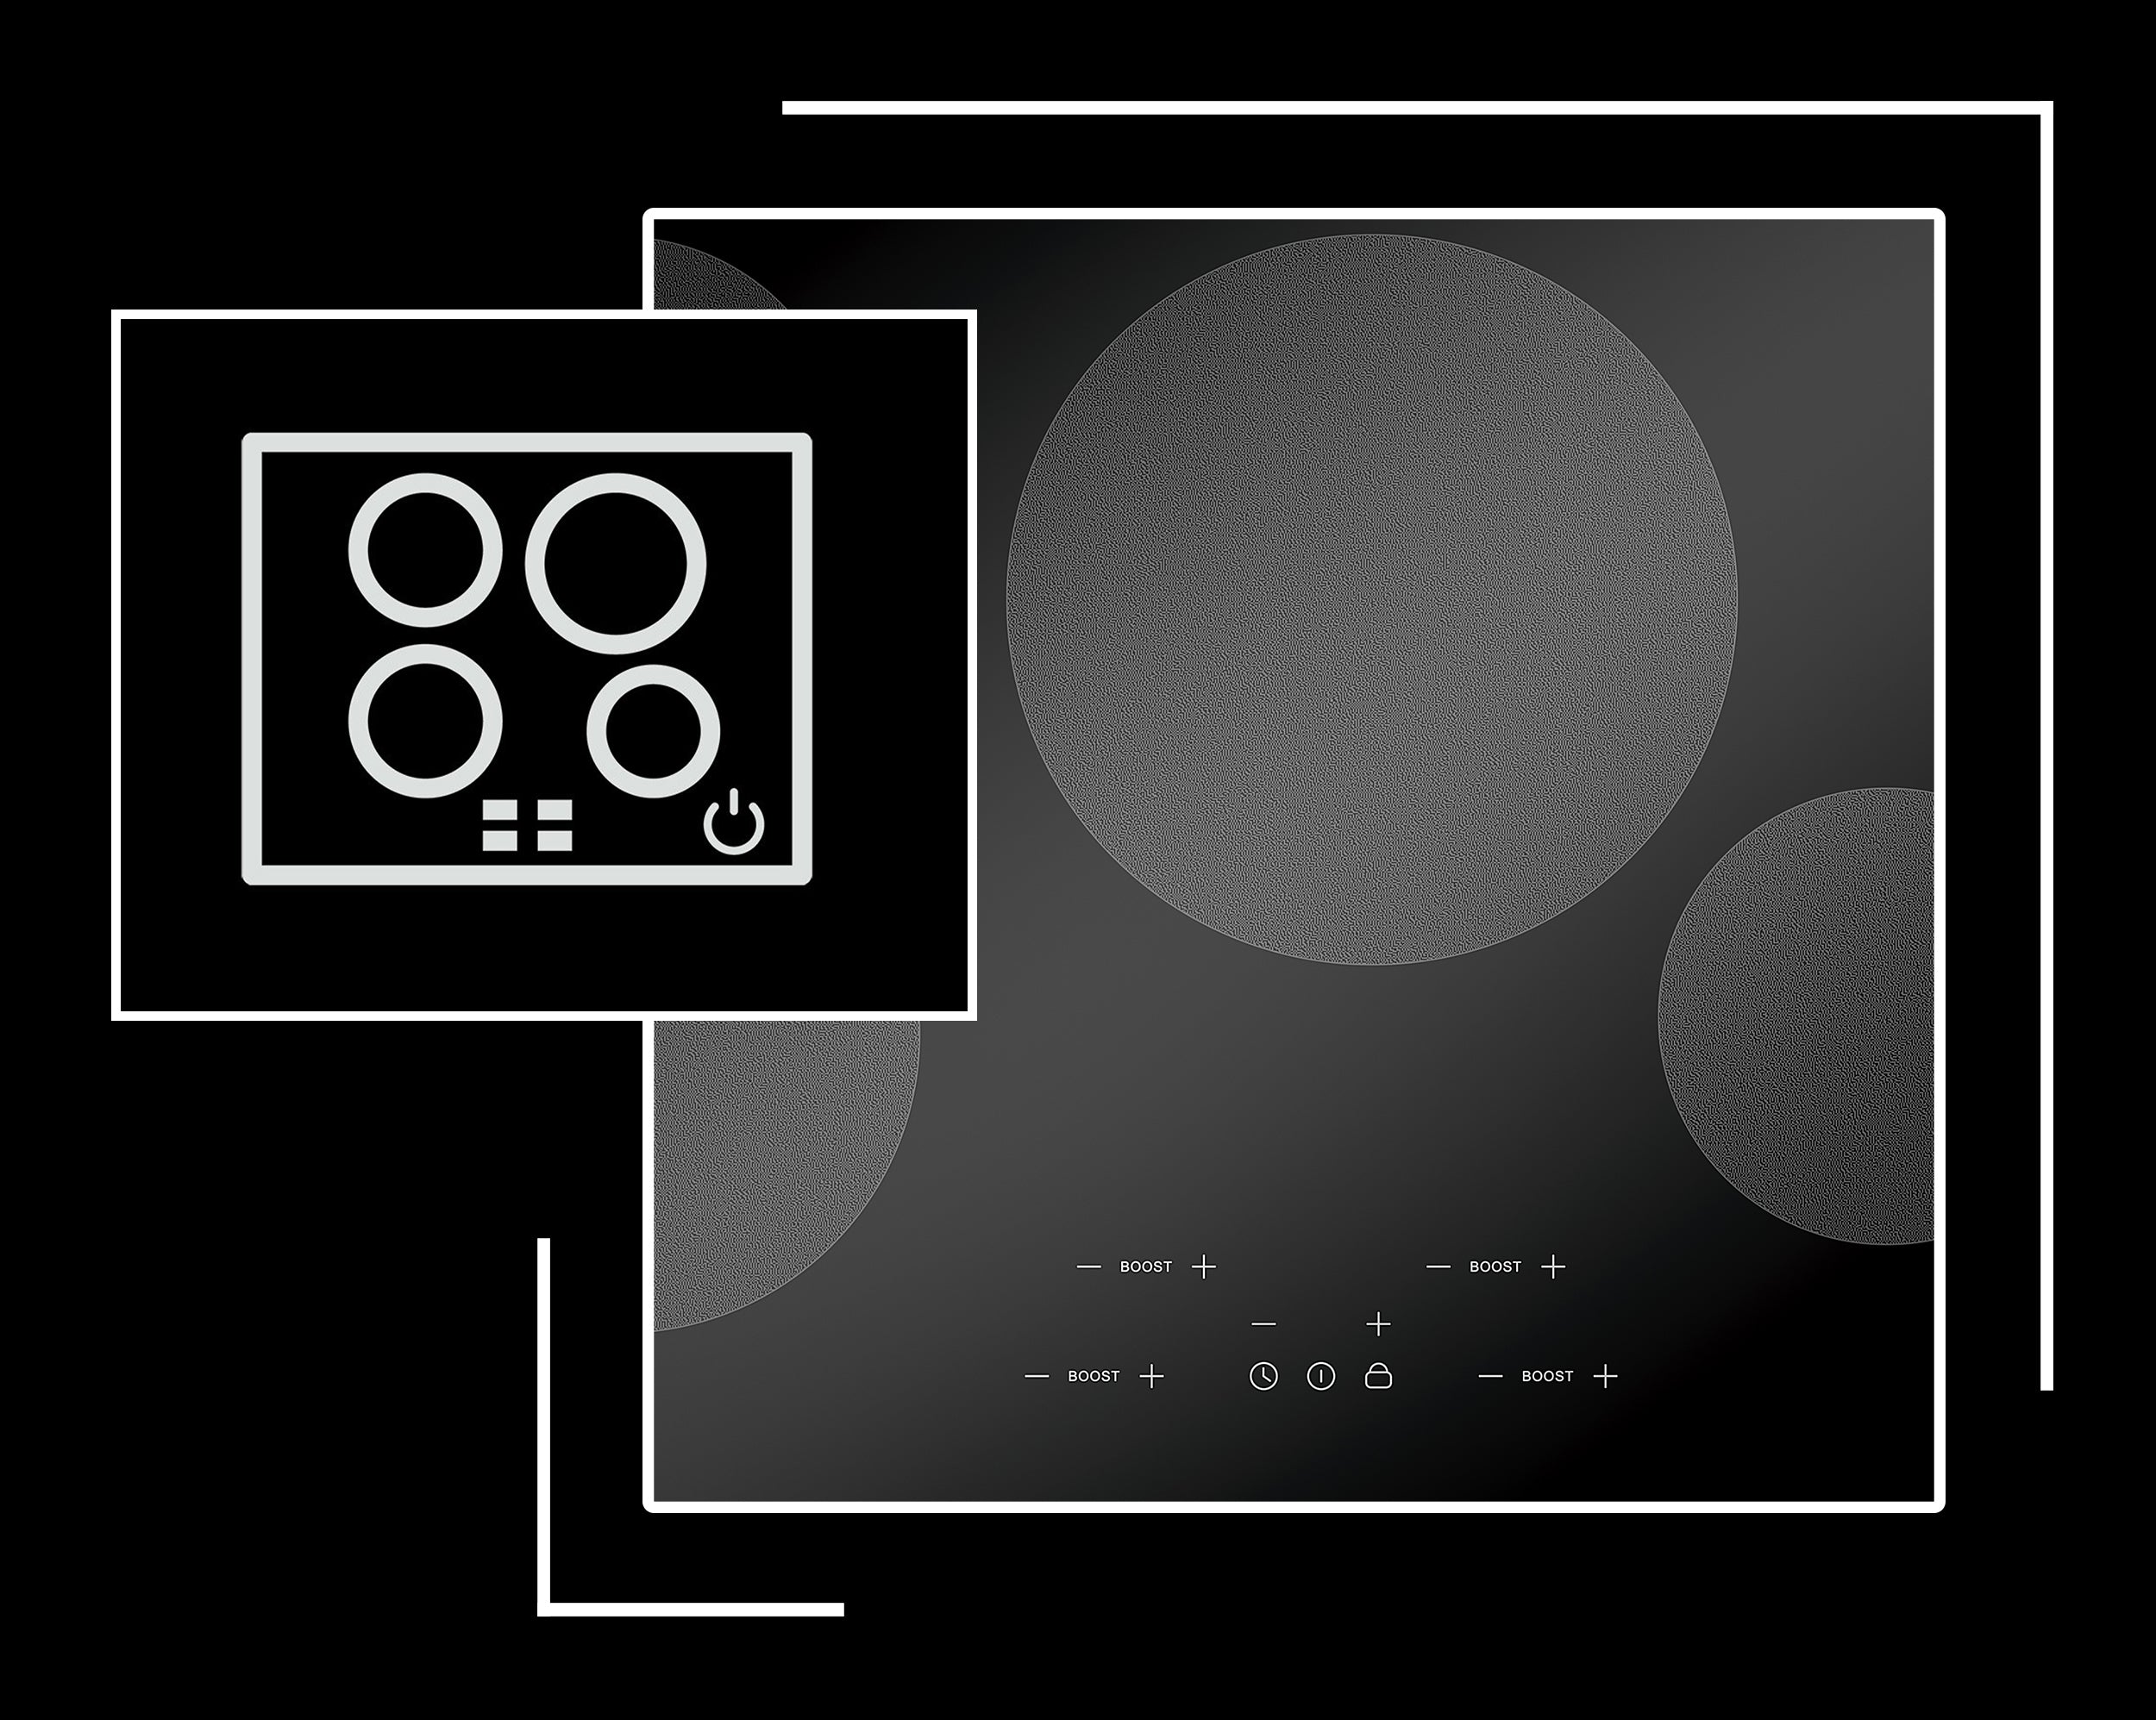 Icon and image representing premium induction cooktop glass